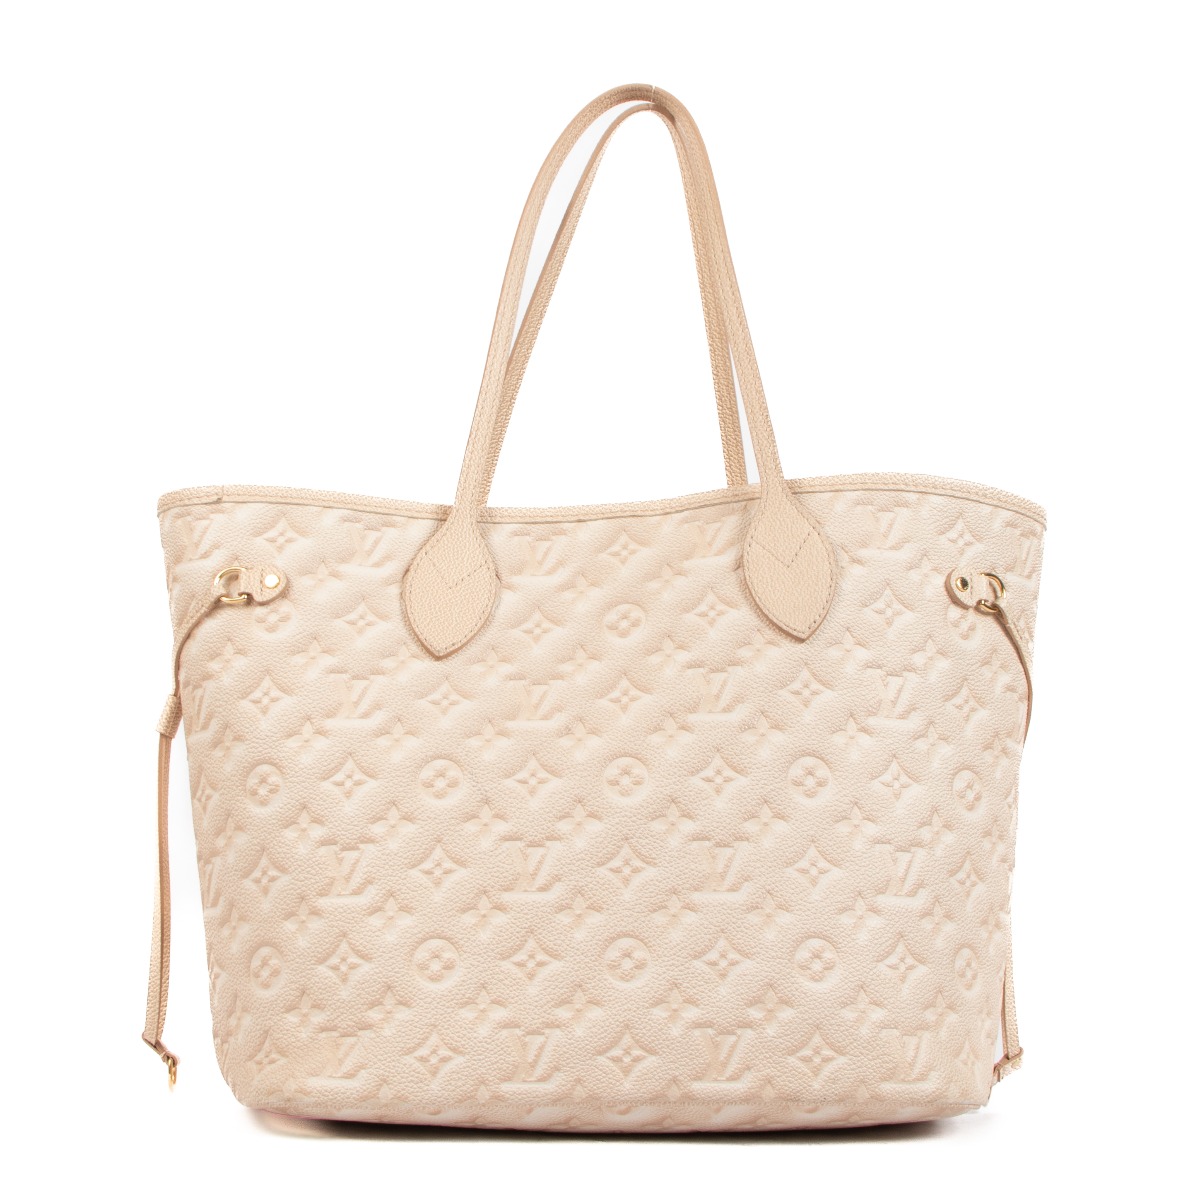 LOUIS VUITTON Stardust Neverfull MM Monogram Leather Tote Bag Pale Bei